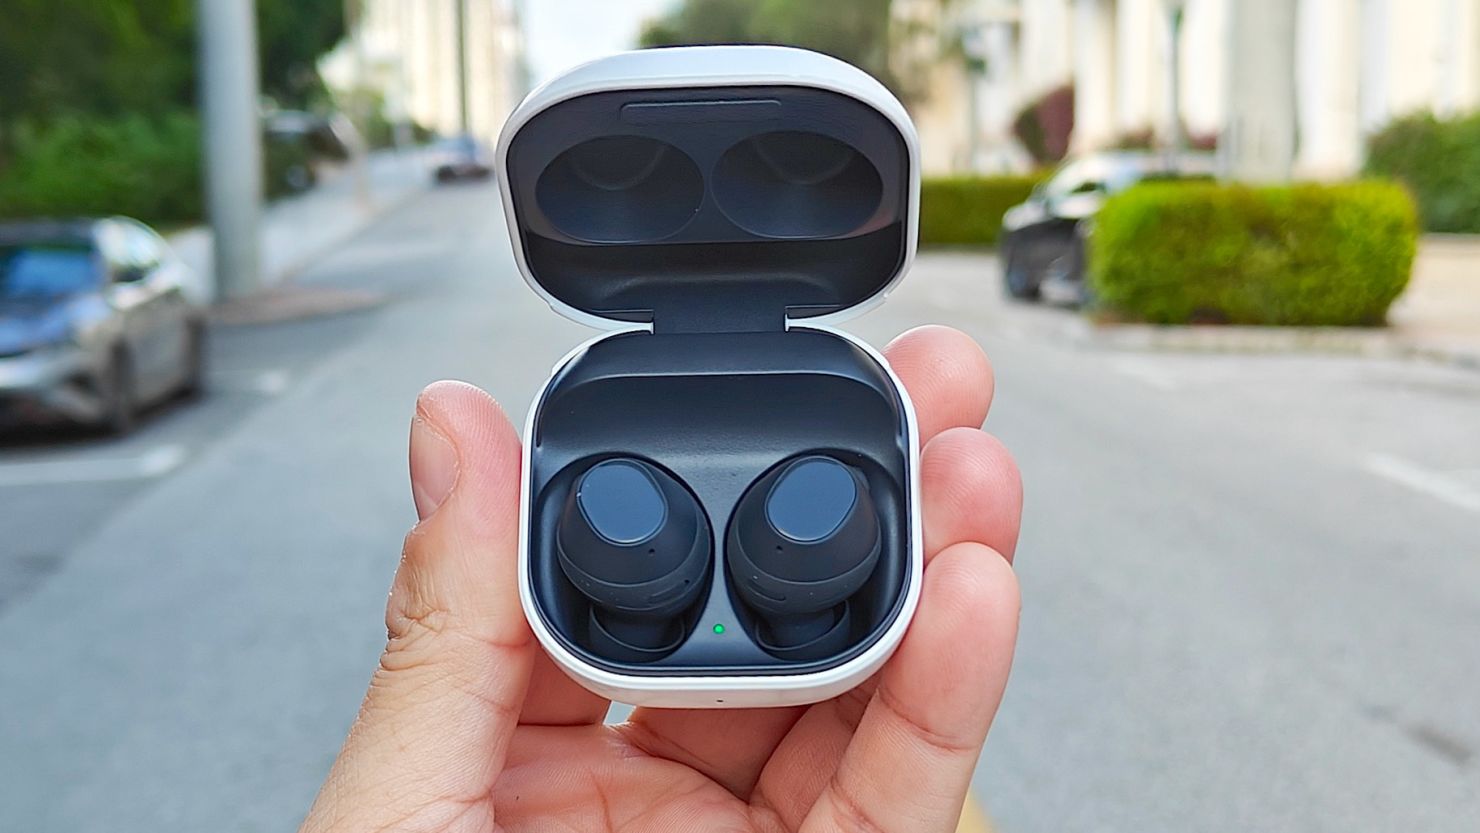 Samsung Galaxy Buds FE Likely Coming Soon With Sub-$100 Price Tag